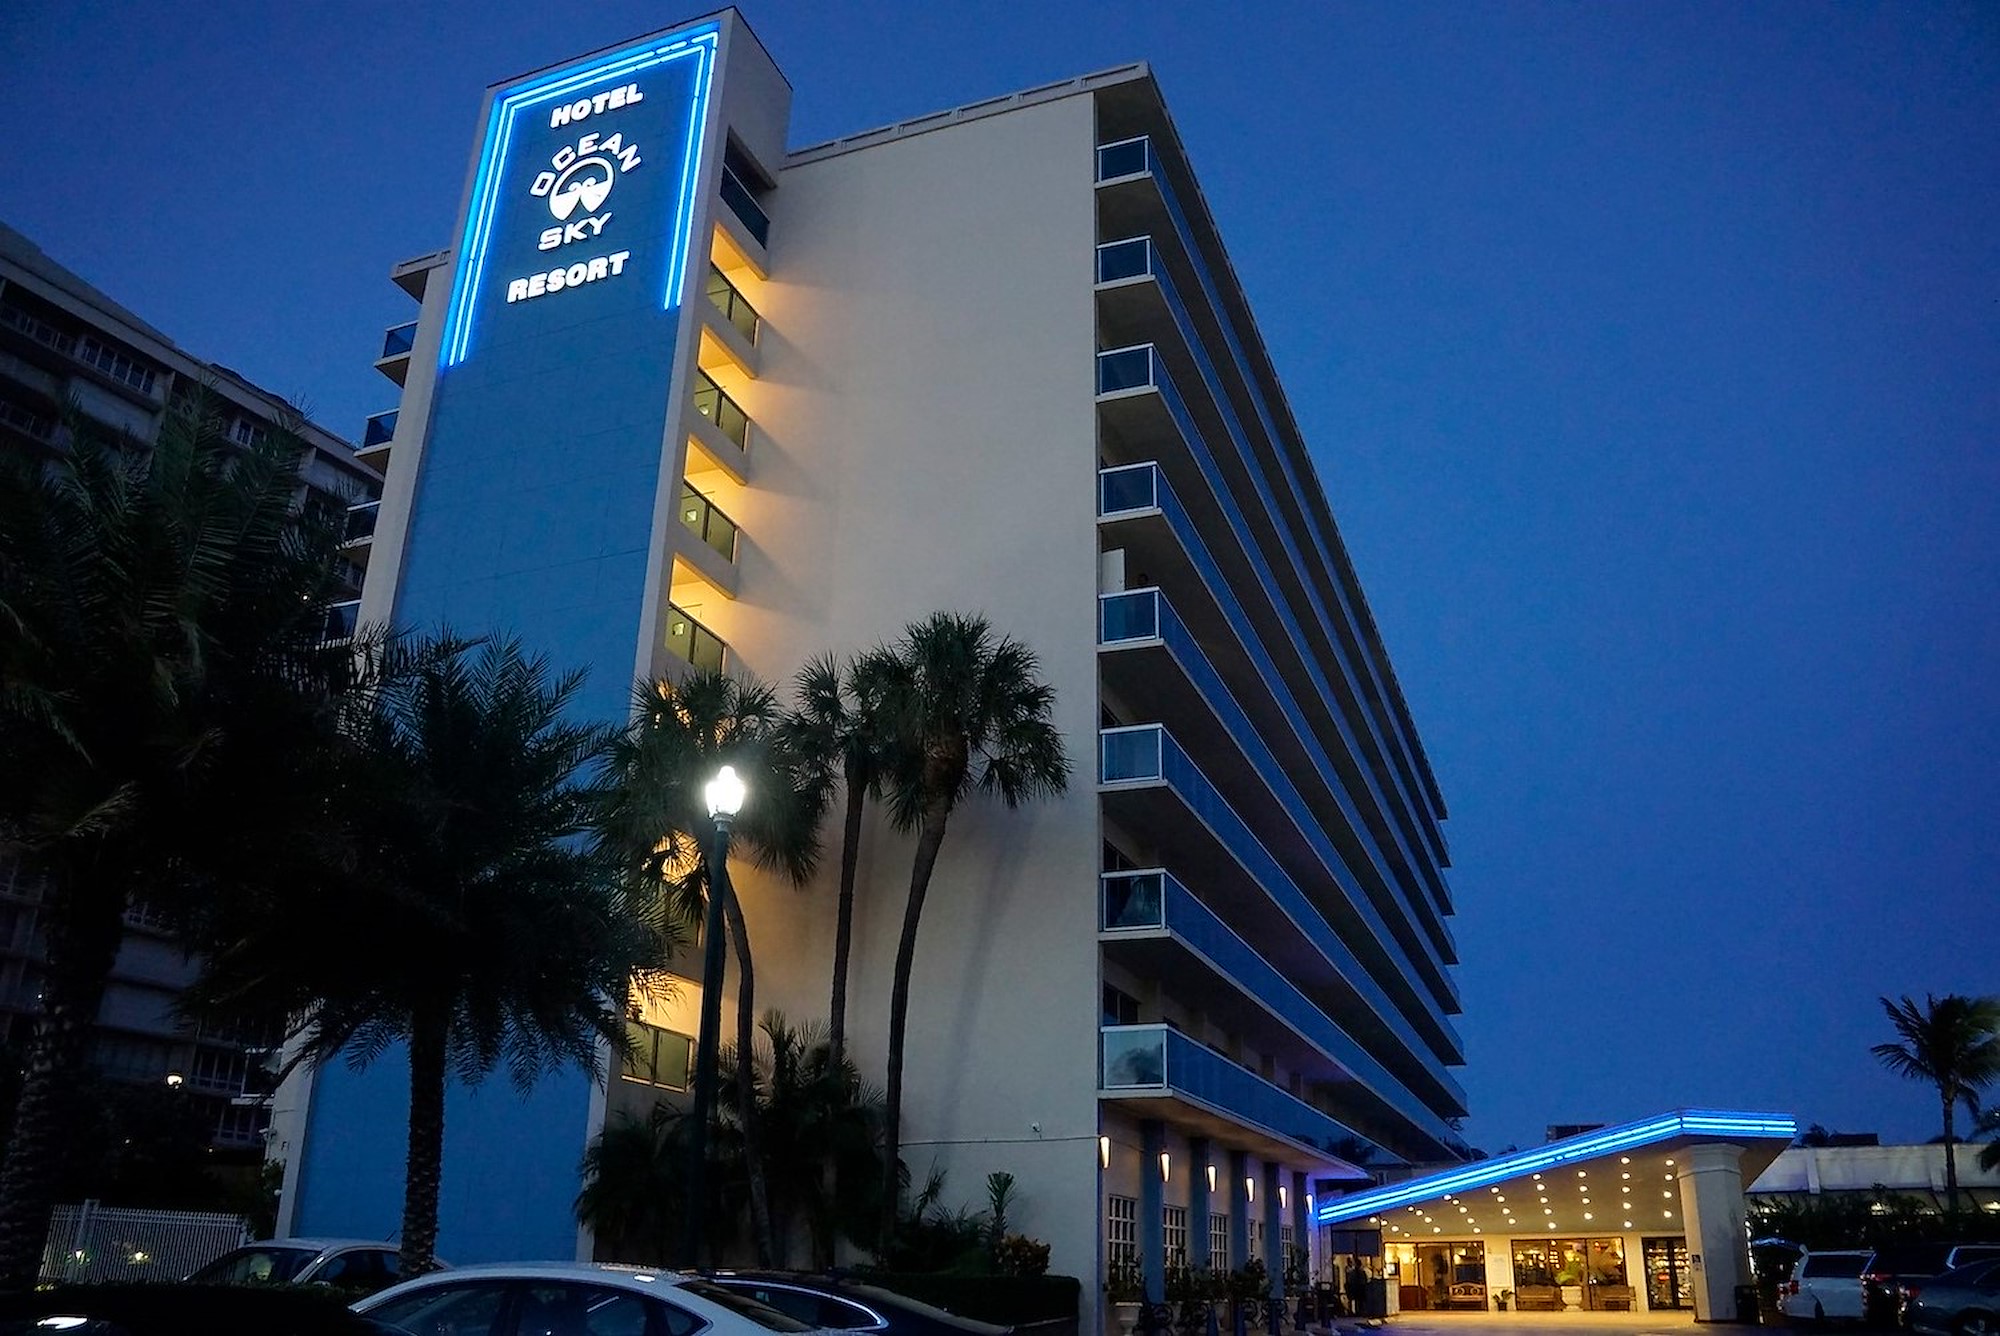 Ocean Sky Hotel Front Entrance - Night time